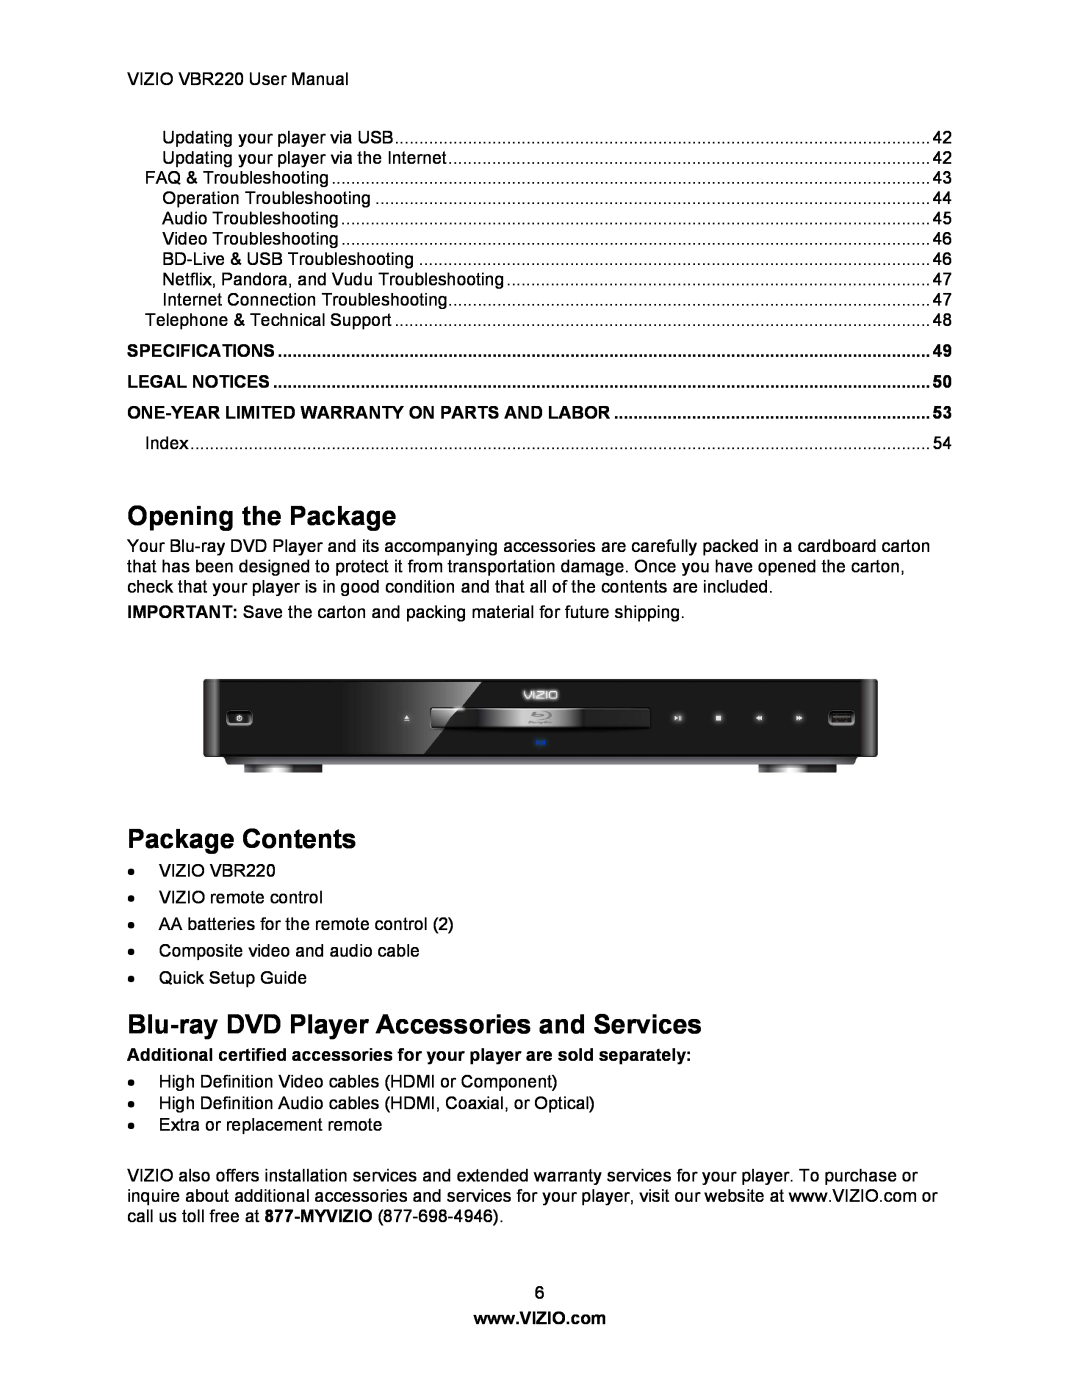 Panasonic VBR220 user manual Opening the Package, Package Contents, Blu-ray DVD Player Accessories and Services 